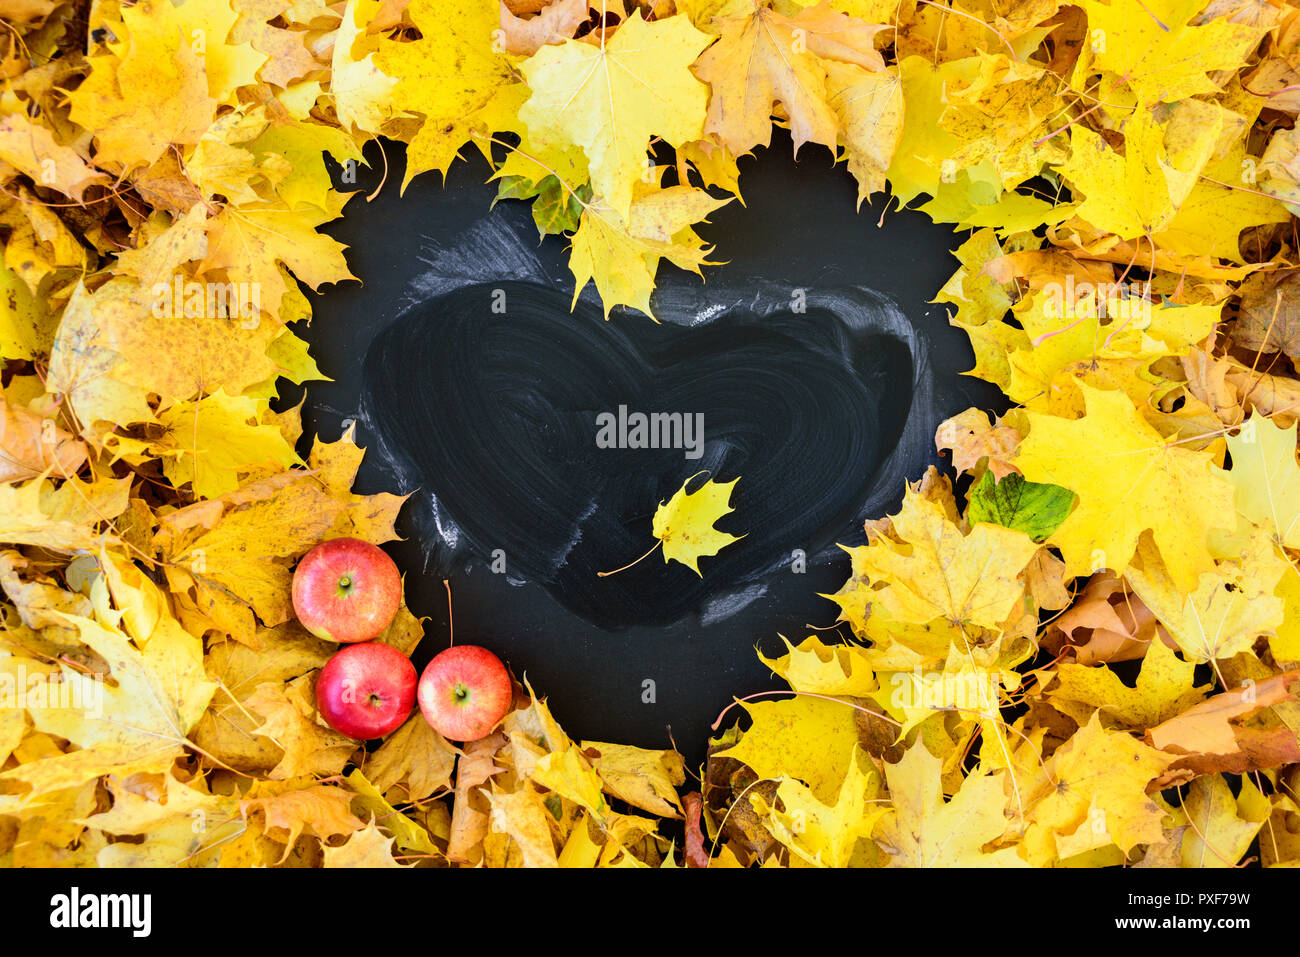 Blackboard with frame of leaves in heart shape. Frame is empty. With apples Stock Photo